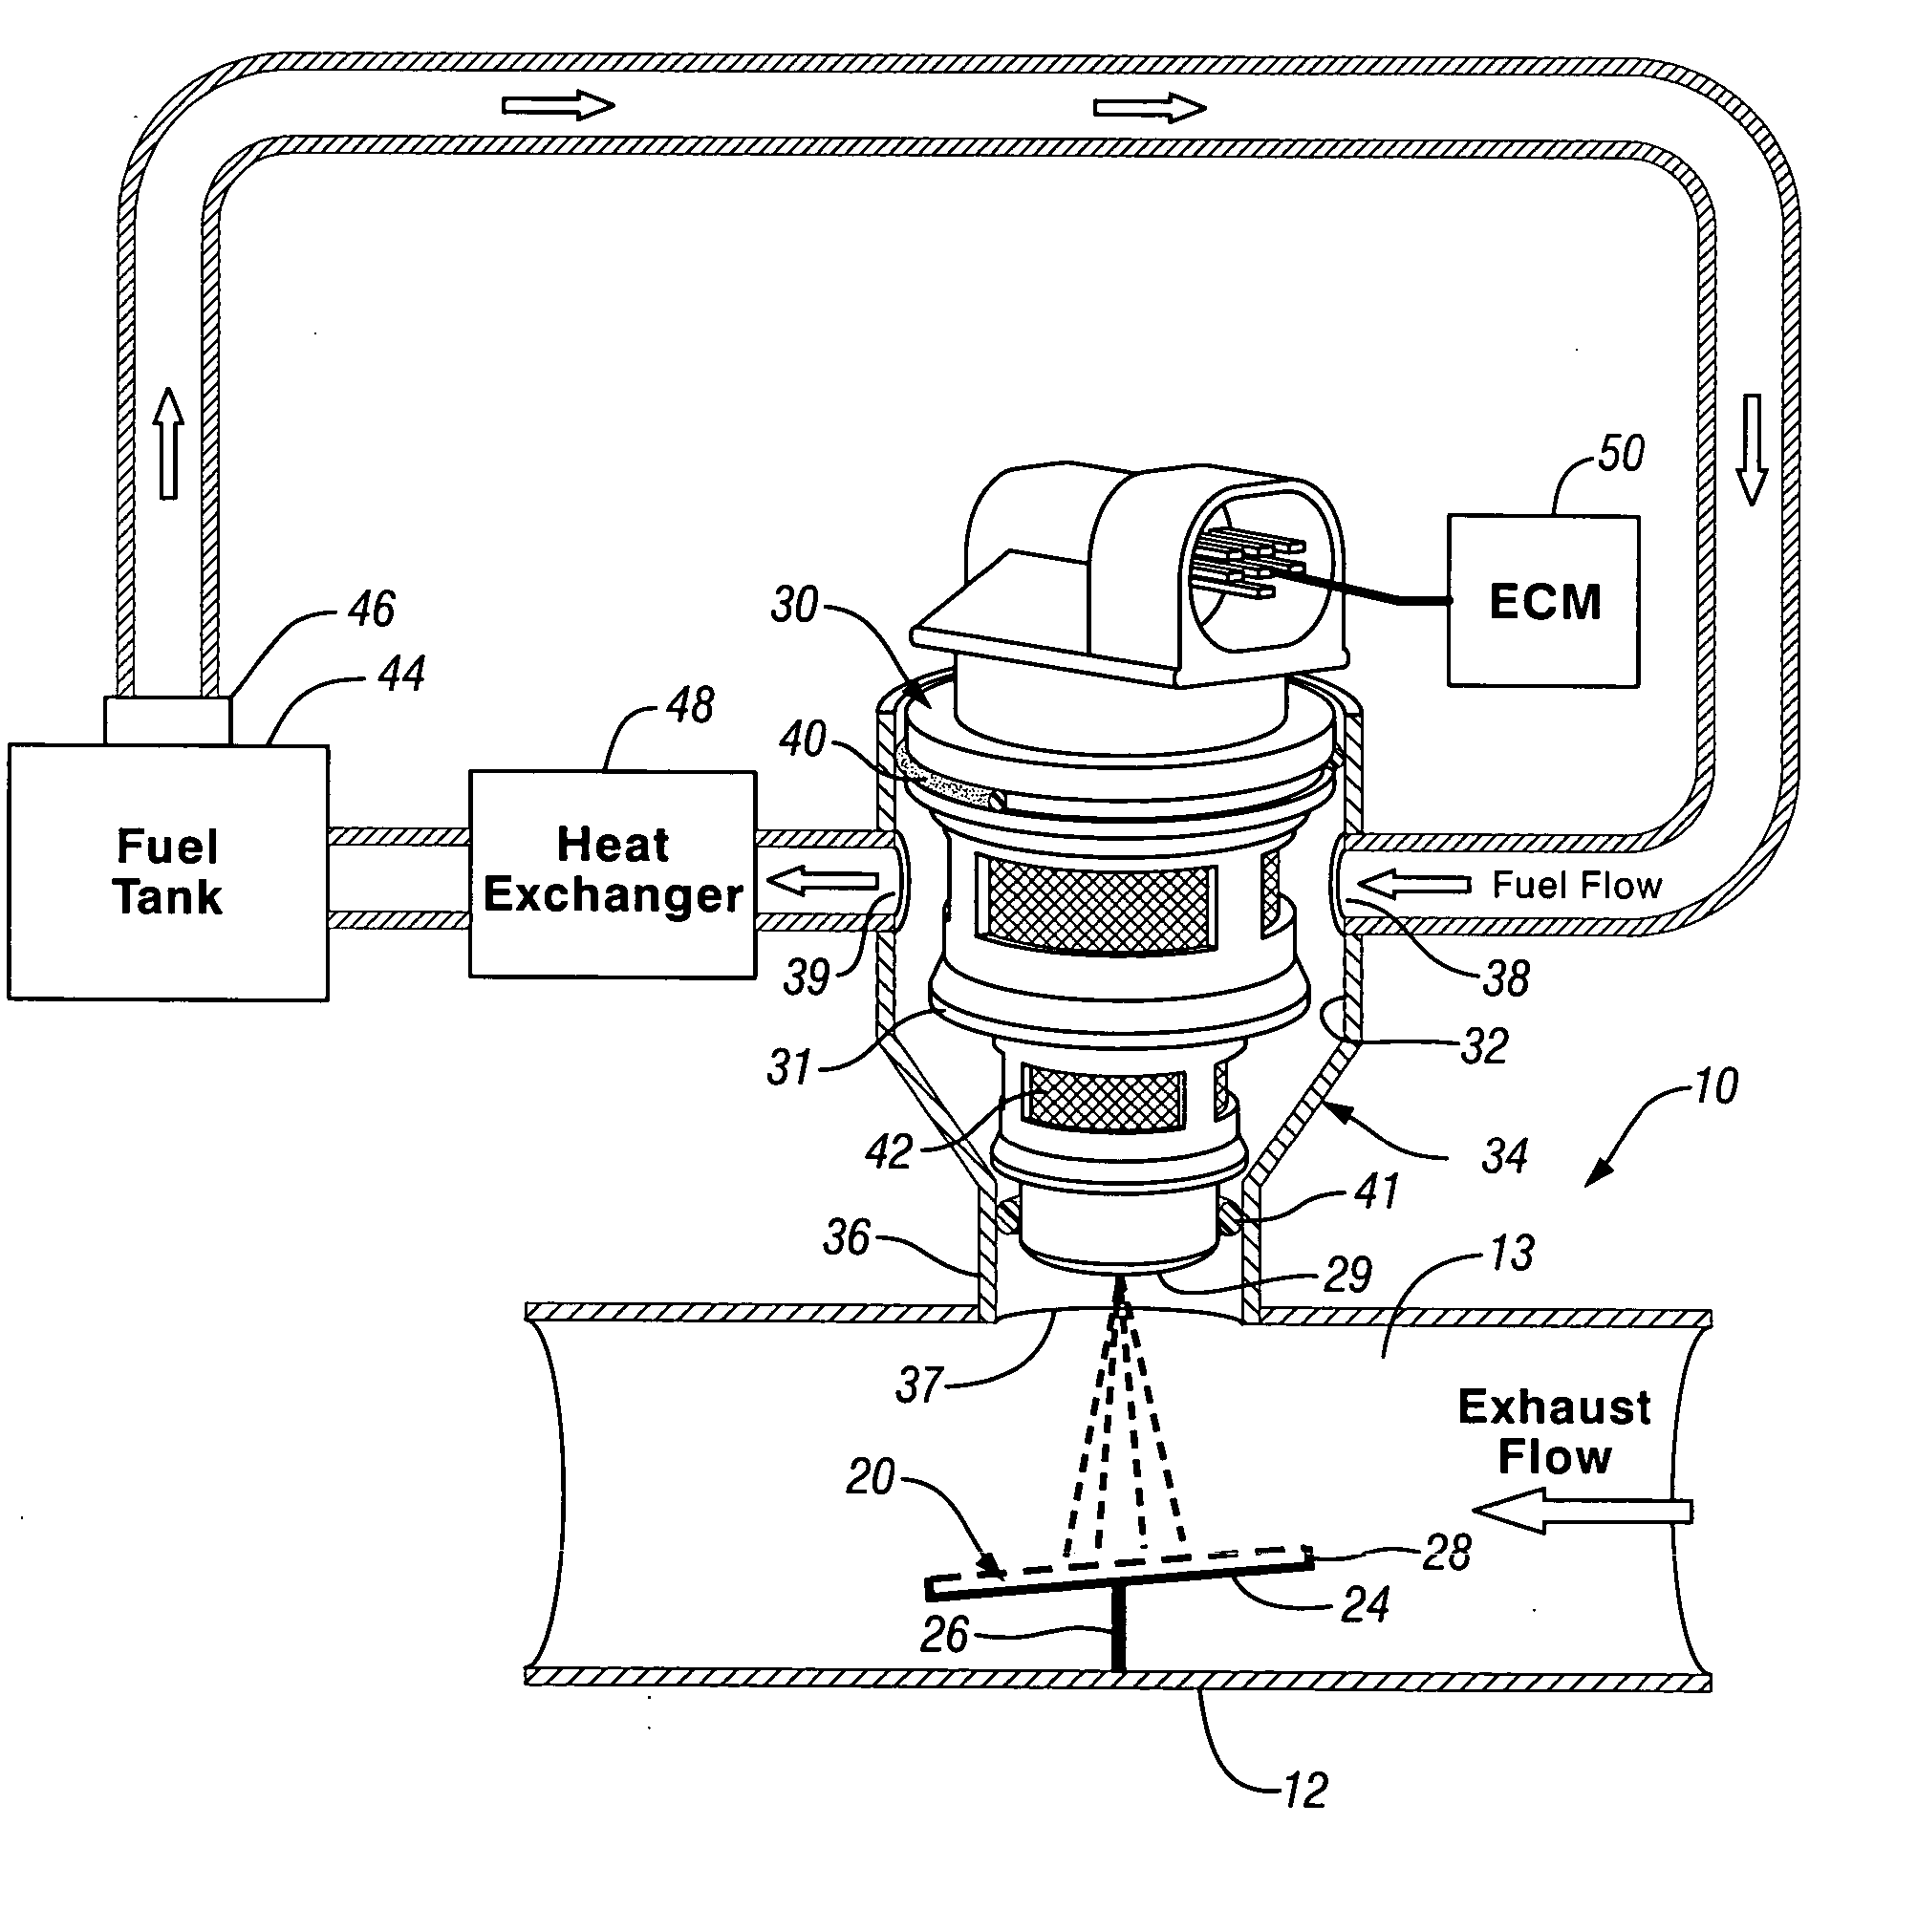 Diesel exhaust aftertreatment device regeneration system